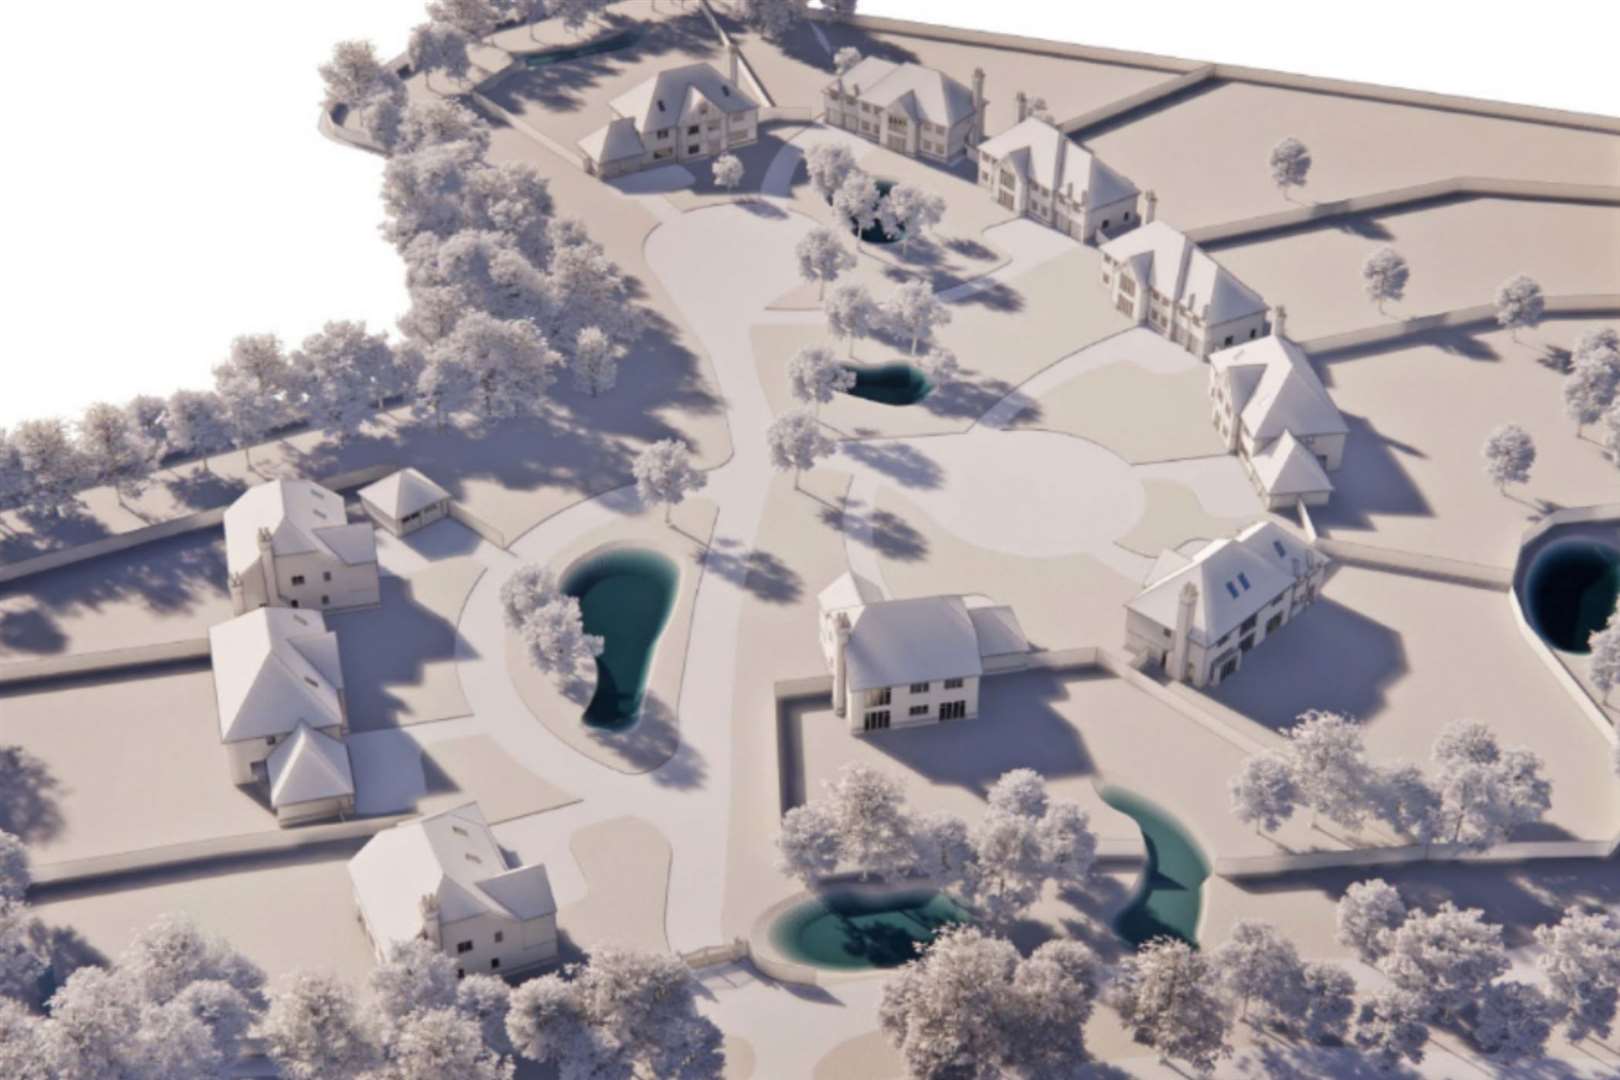 The homes would have their own sizeable plot of land with landscaped gardens, large parking area and garage. Picture: Picture: Building Design Studio/Ashford Borough Council planning website